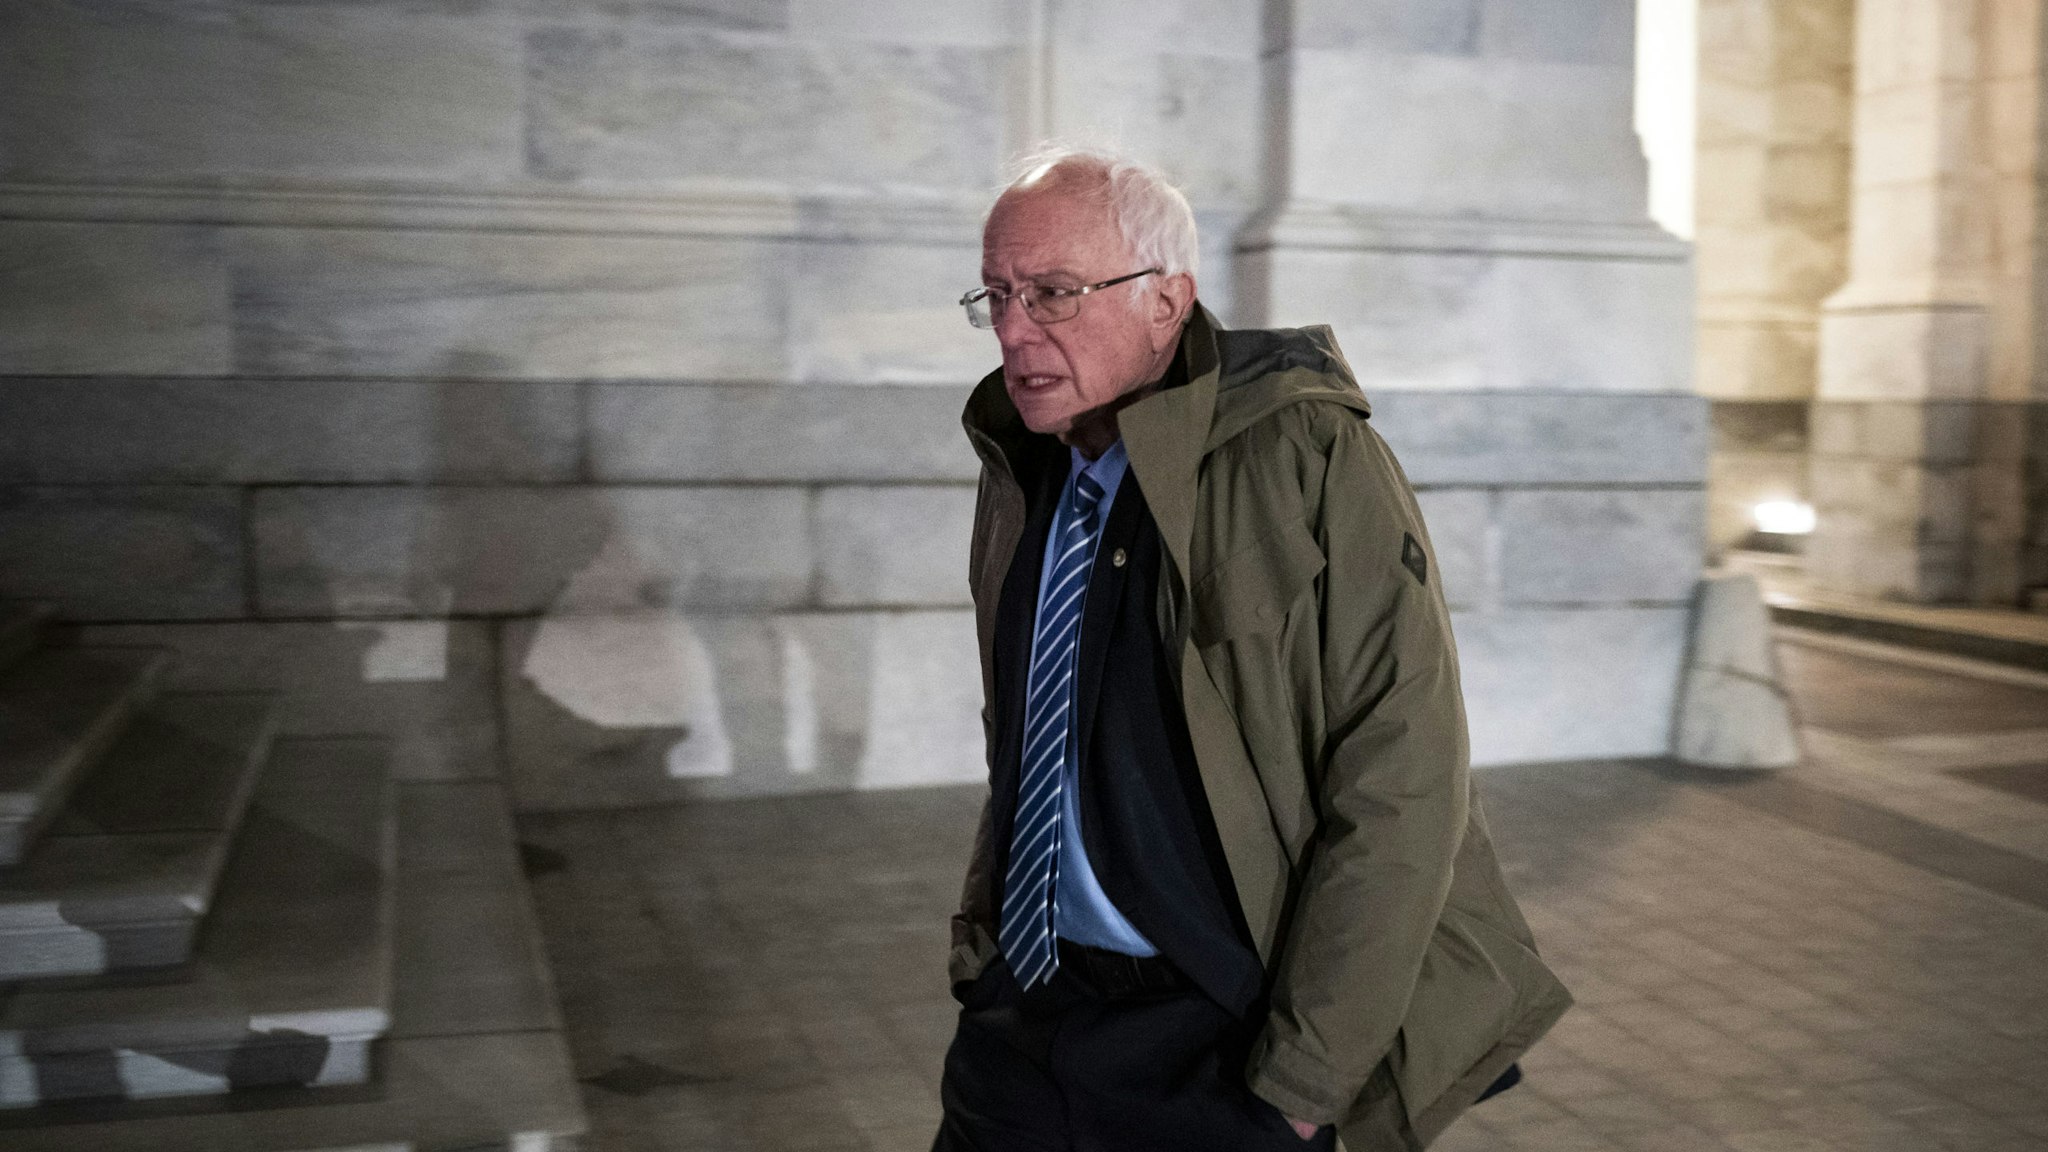 Senator Bernie Sanders, an Independent from Vermont and 2020 presidential candidate, departs the U.S. Capitol following a vote in Washington, D.C., U.S., on Wednesday, March 25, 2020. The U.S. Senate approved a historic $2 trillion rescue plan to respond to the economic and health crisis caused by the coronavirus pandemic, putting pressure on the Democratic-led House to pass the bill quickly and send it to President Donald Trump for his signature. Photographer: Al Drago/Bloomberg via Getty Images